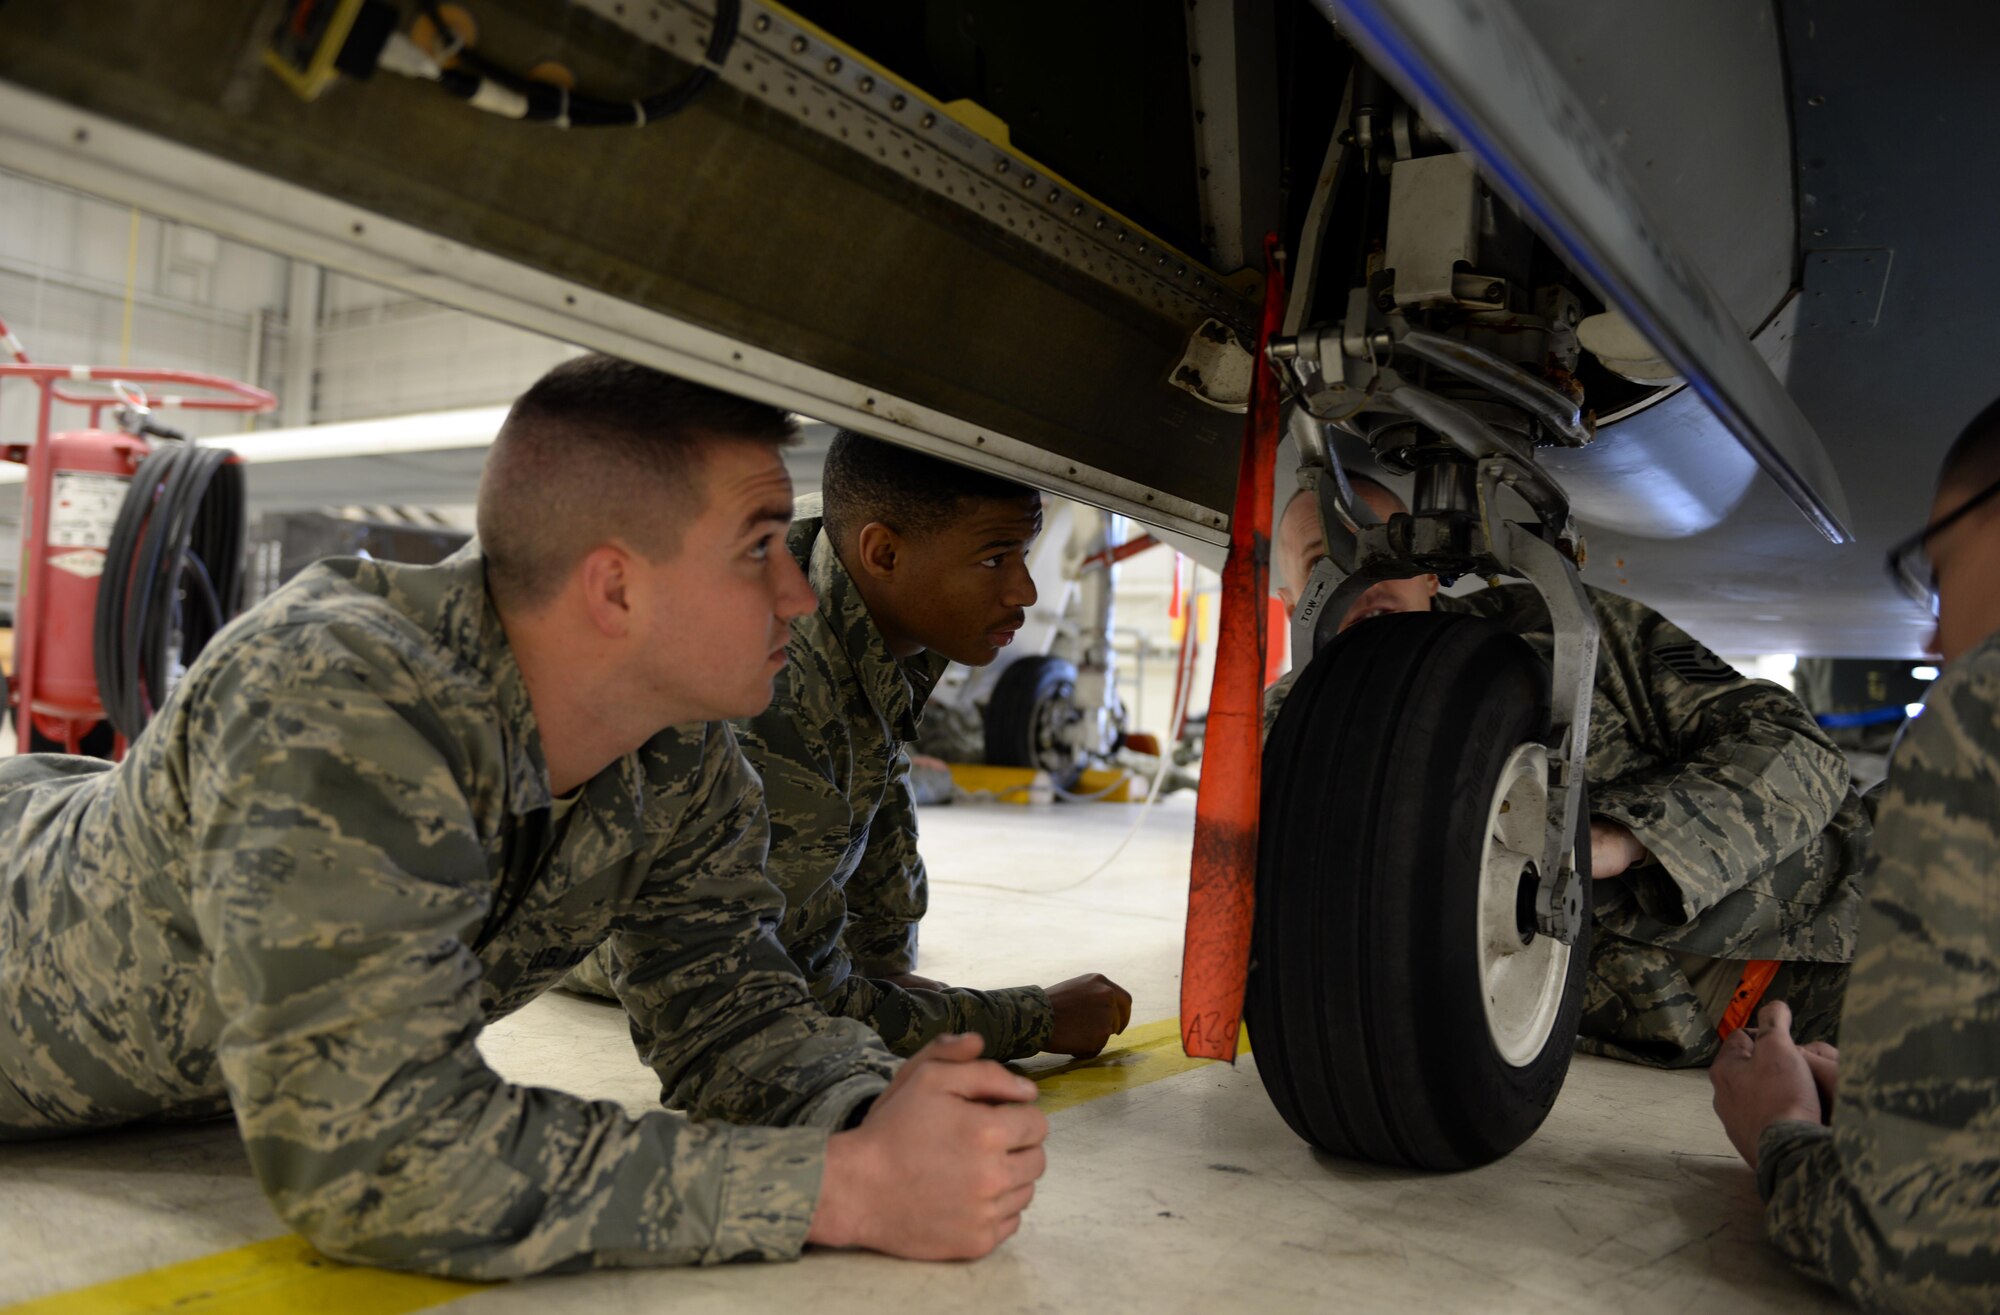 Airmen with the 372nd Training Squadron Detachment 21, inspect the landing gear of a RQ-4 Global Hawk Jan. 20, 2015, at Beale Air Force Base, Calif. The Airmen are the first students to attend the RQ-4 remotely piloted aircraft maintenance course taught at Beale. (U.S. Air Force photo by Senior Airman Bobby Cummings)